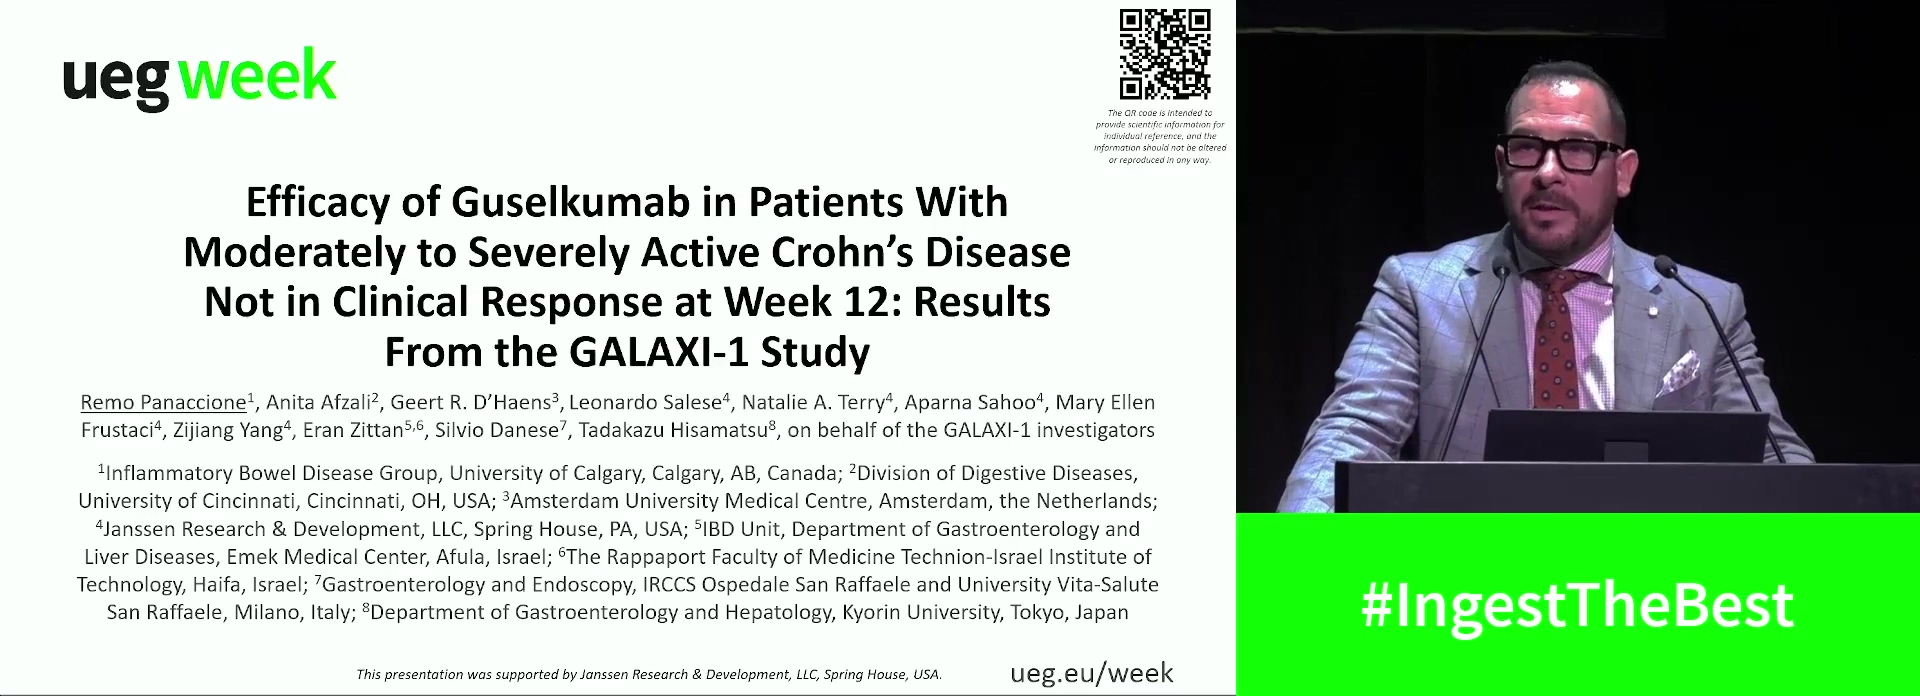 EFFICACY OF GUSELKUMAB IN PATIENTS WITH MODERATELY TO SEVERELY ACTIVE CROHN’S DISEASE NOT IN CLINICAL RESPONSE AT WEEK 12: RESULTS FROM THE GALAXI 1 STUDY